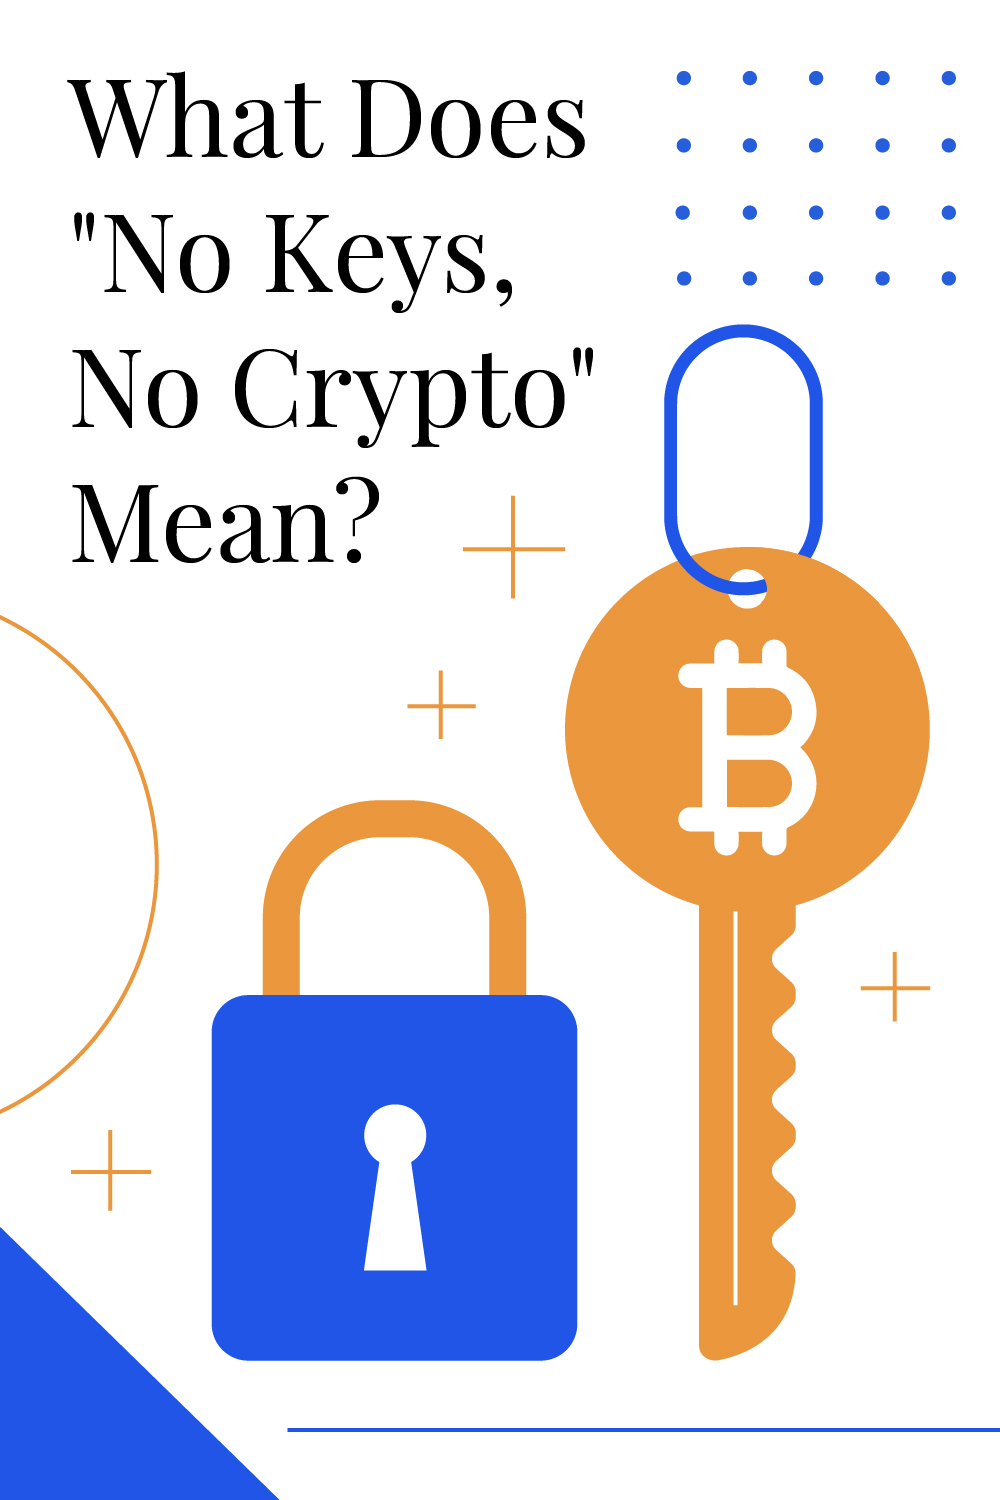 What Does “Not Your Keys, Not Your Crypto” Mean?